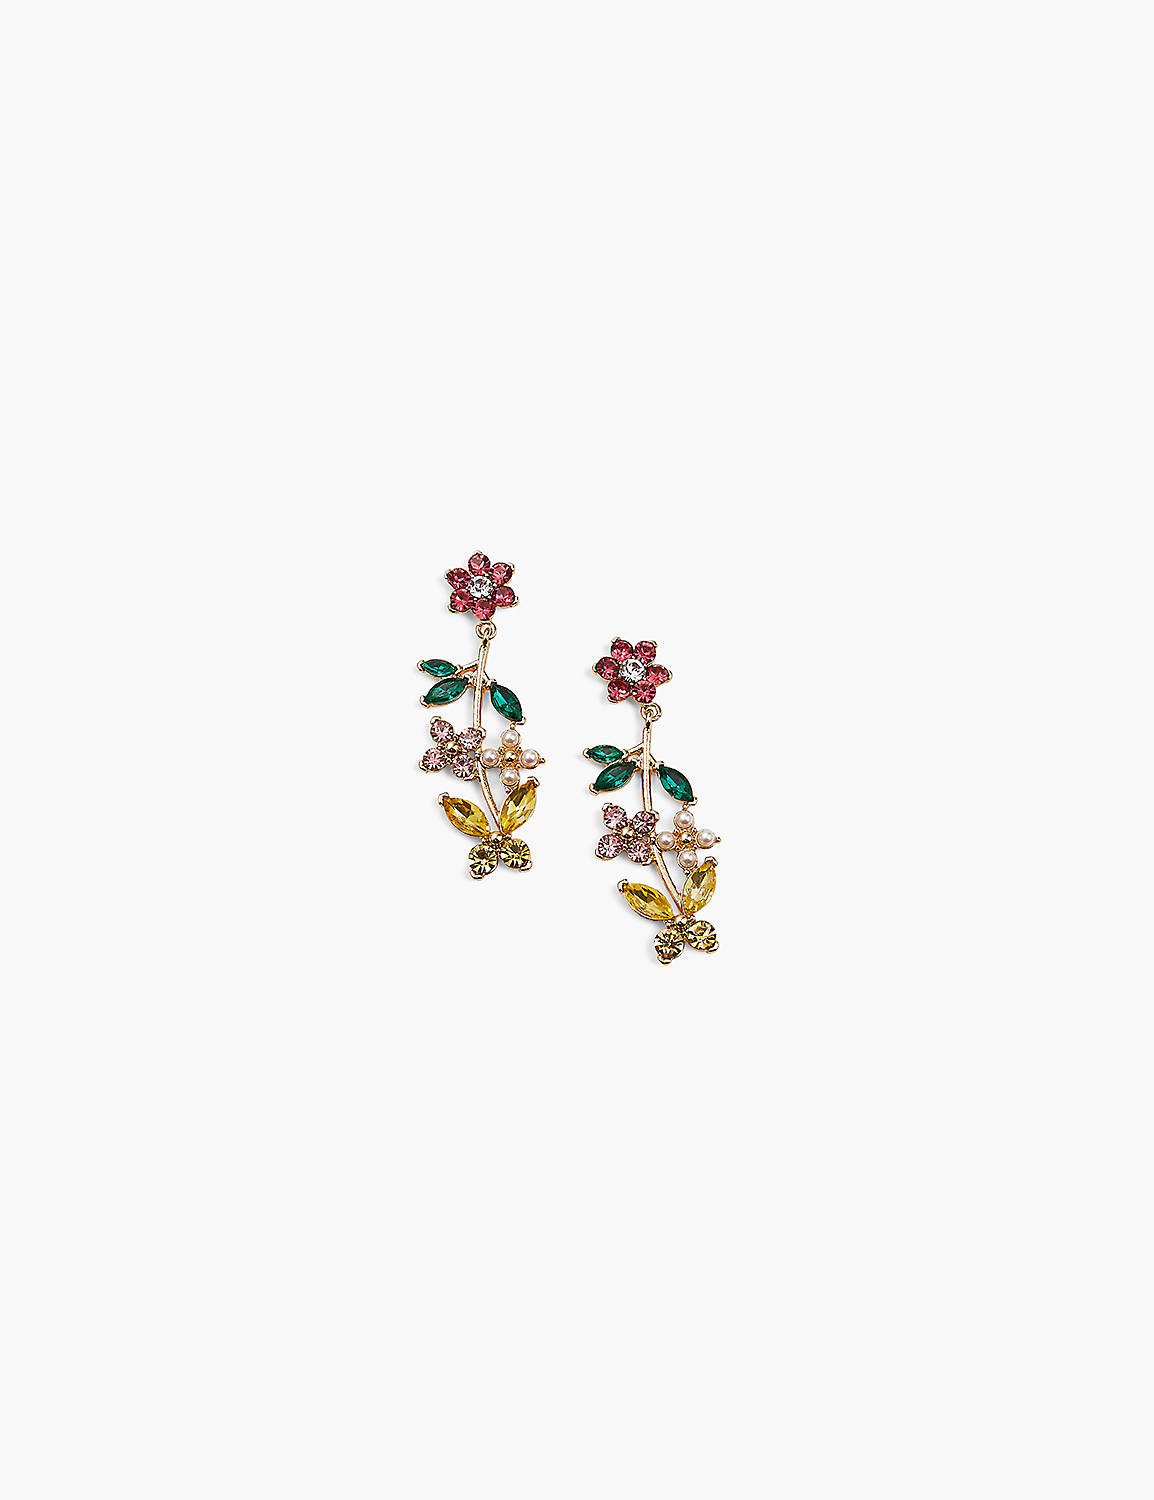 Pave Flower Drop Earrings Product Image 1